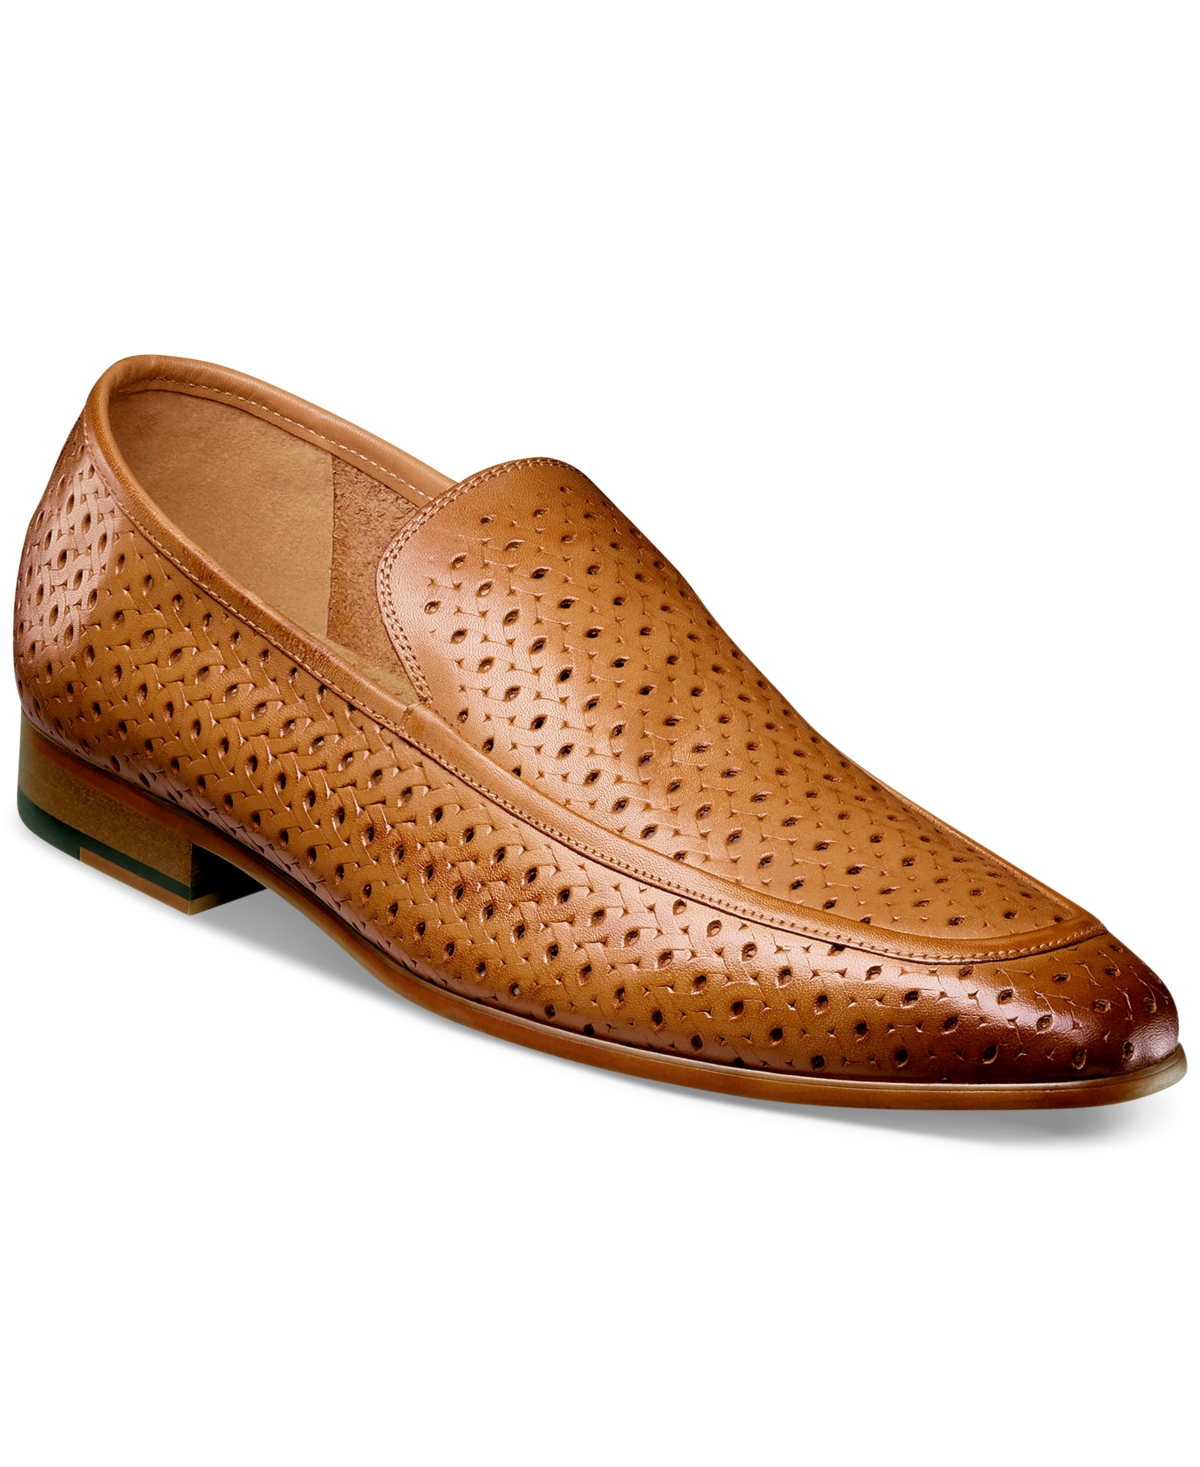 Men's Winden Perforated Slip-On Loafers - Natural